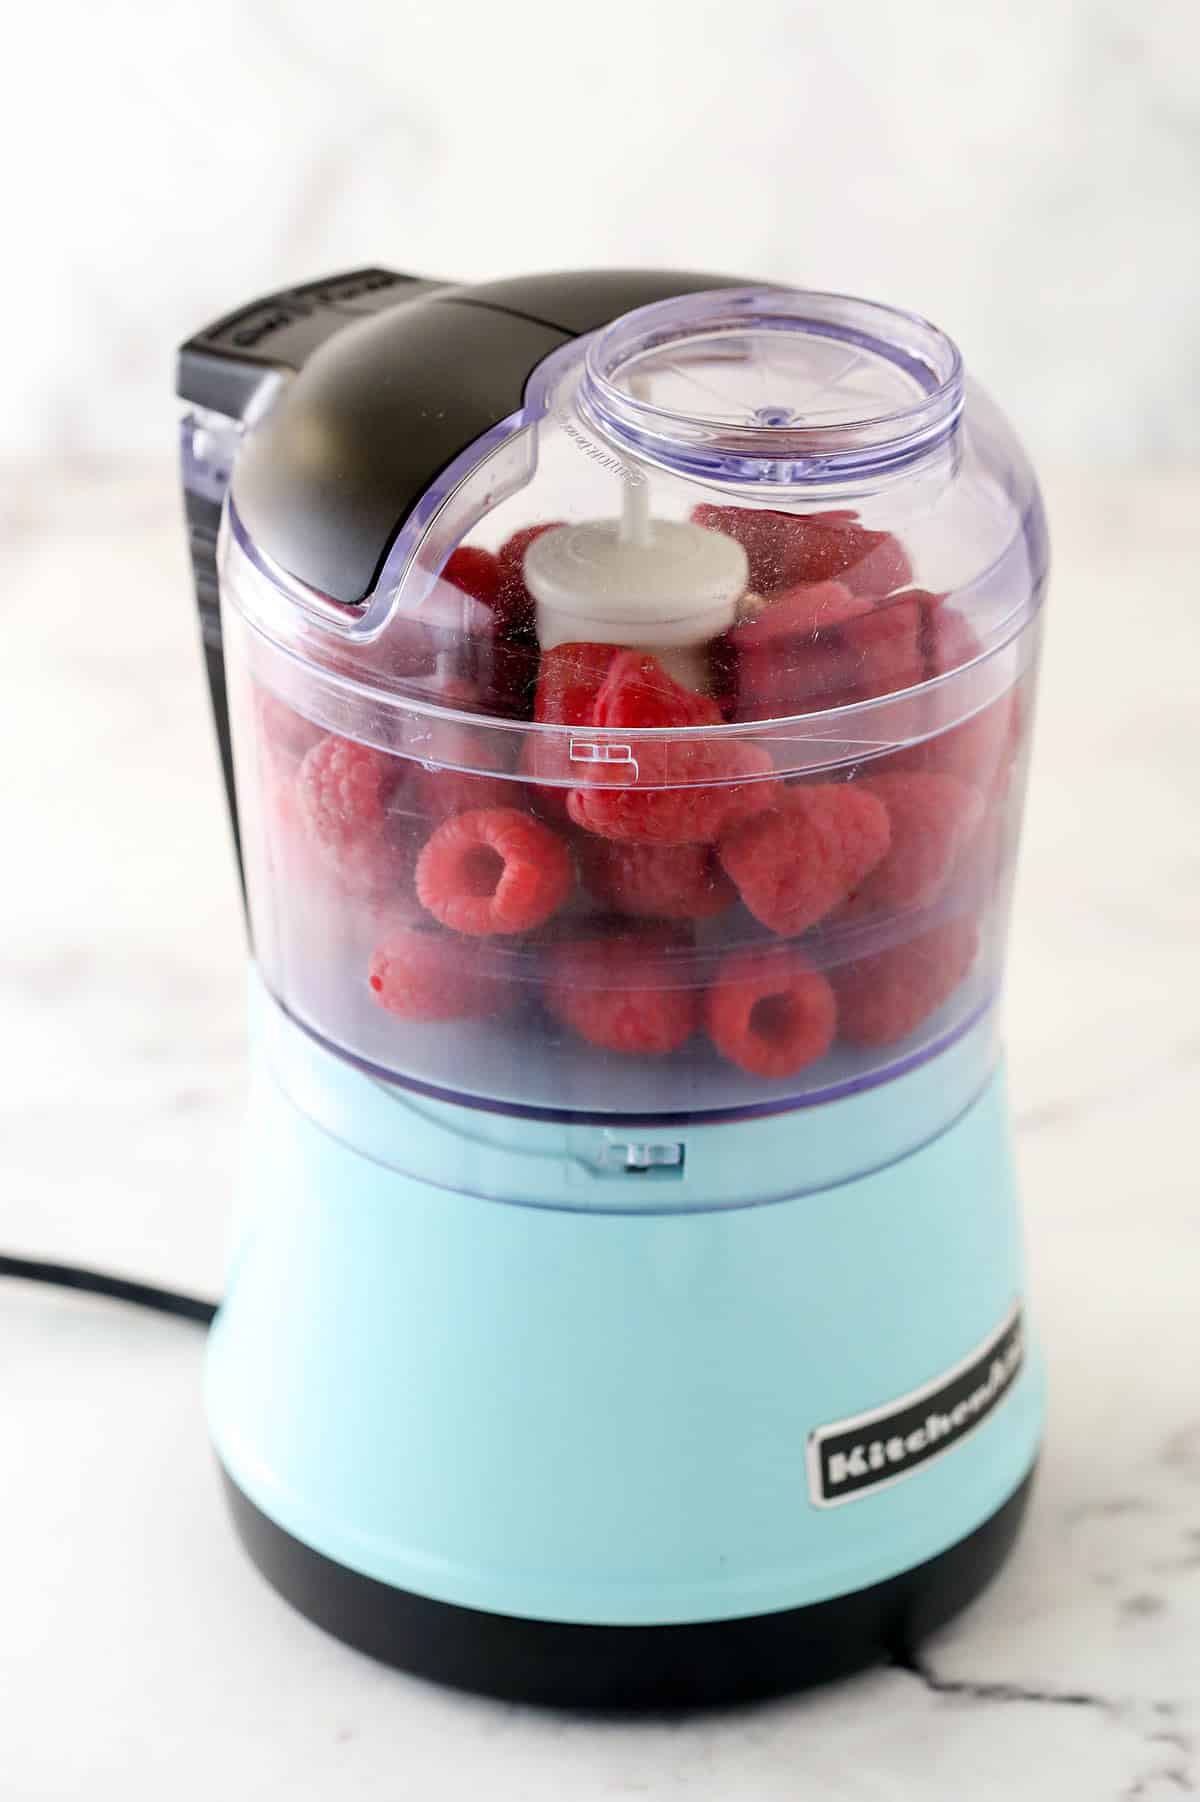 Adding the raspberries to the food processor.